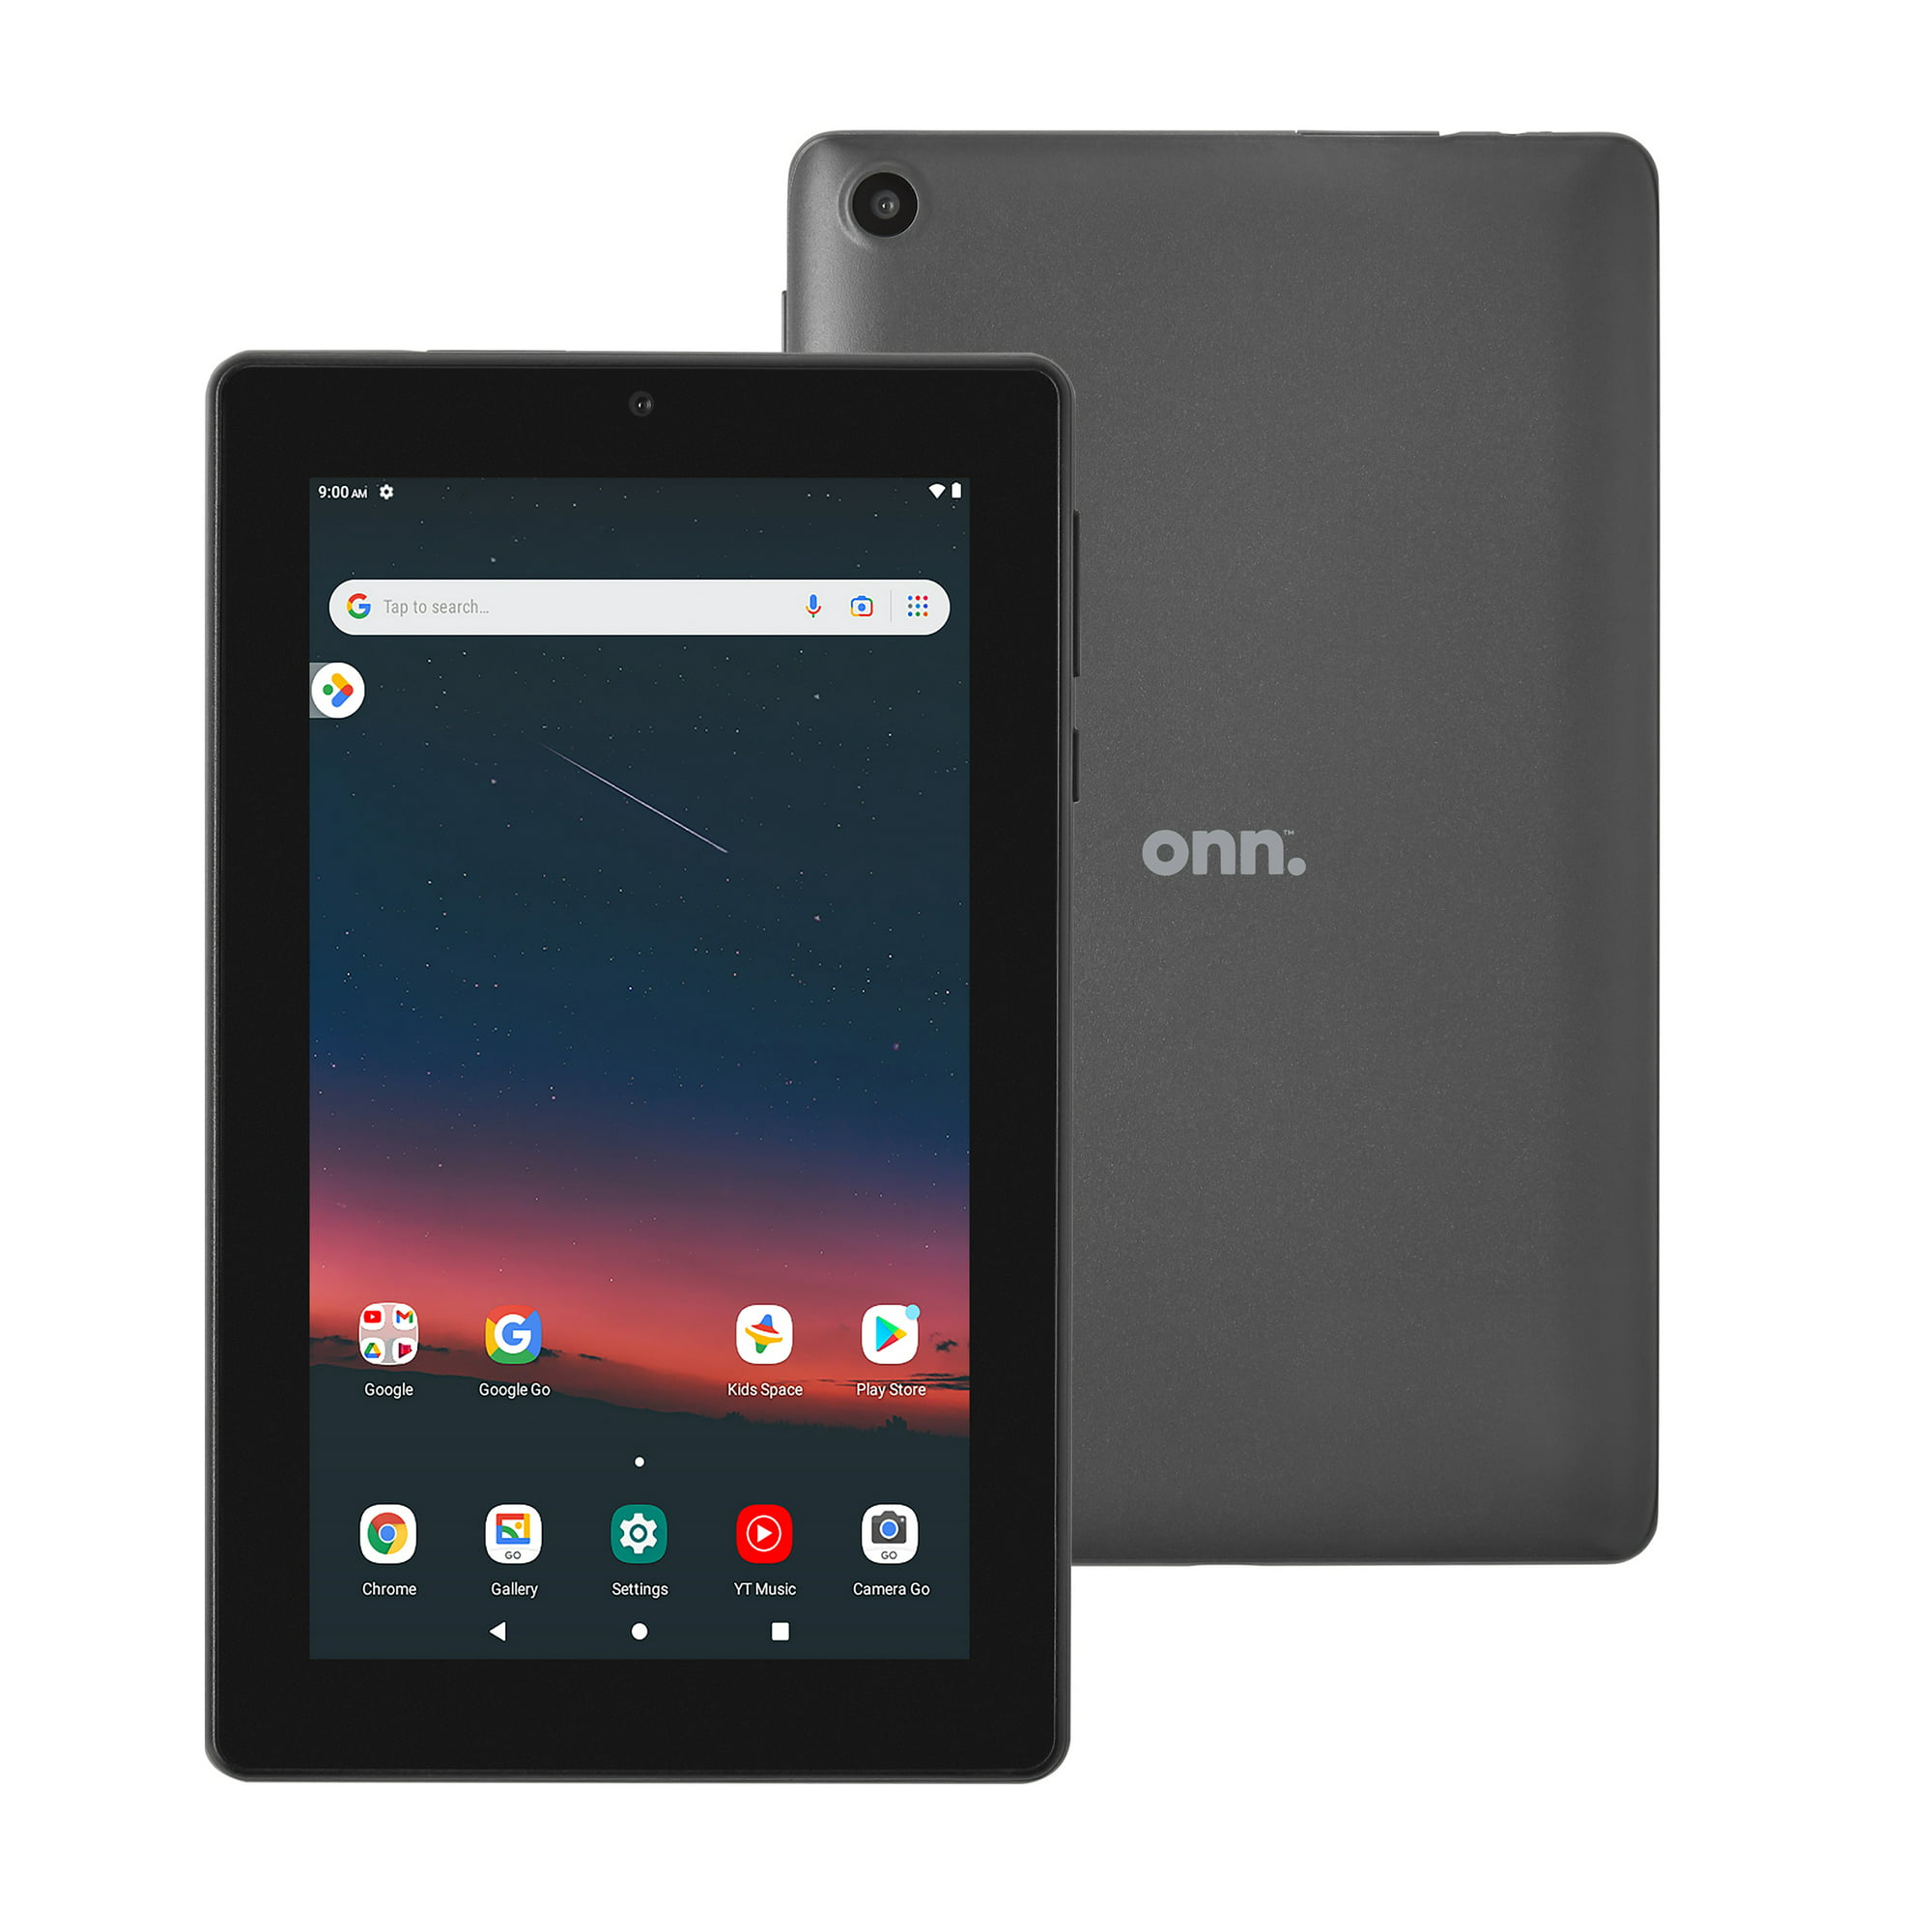 onn. 7″ Tablet with 32GB 2.0 GHz Quad-Core Processor